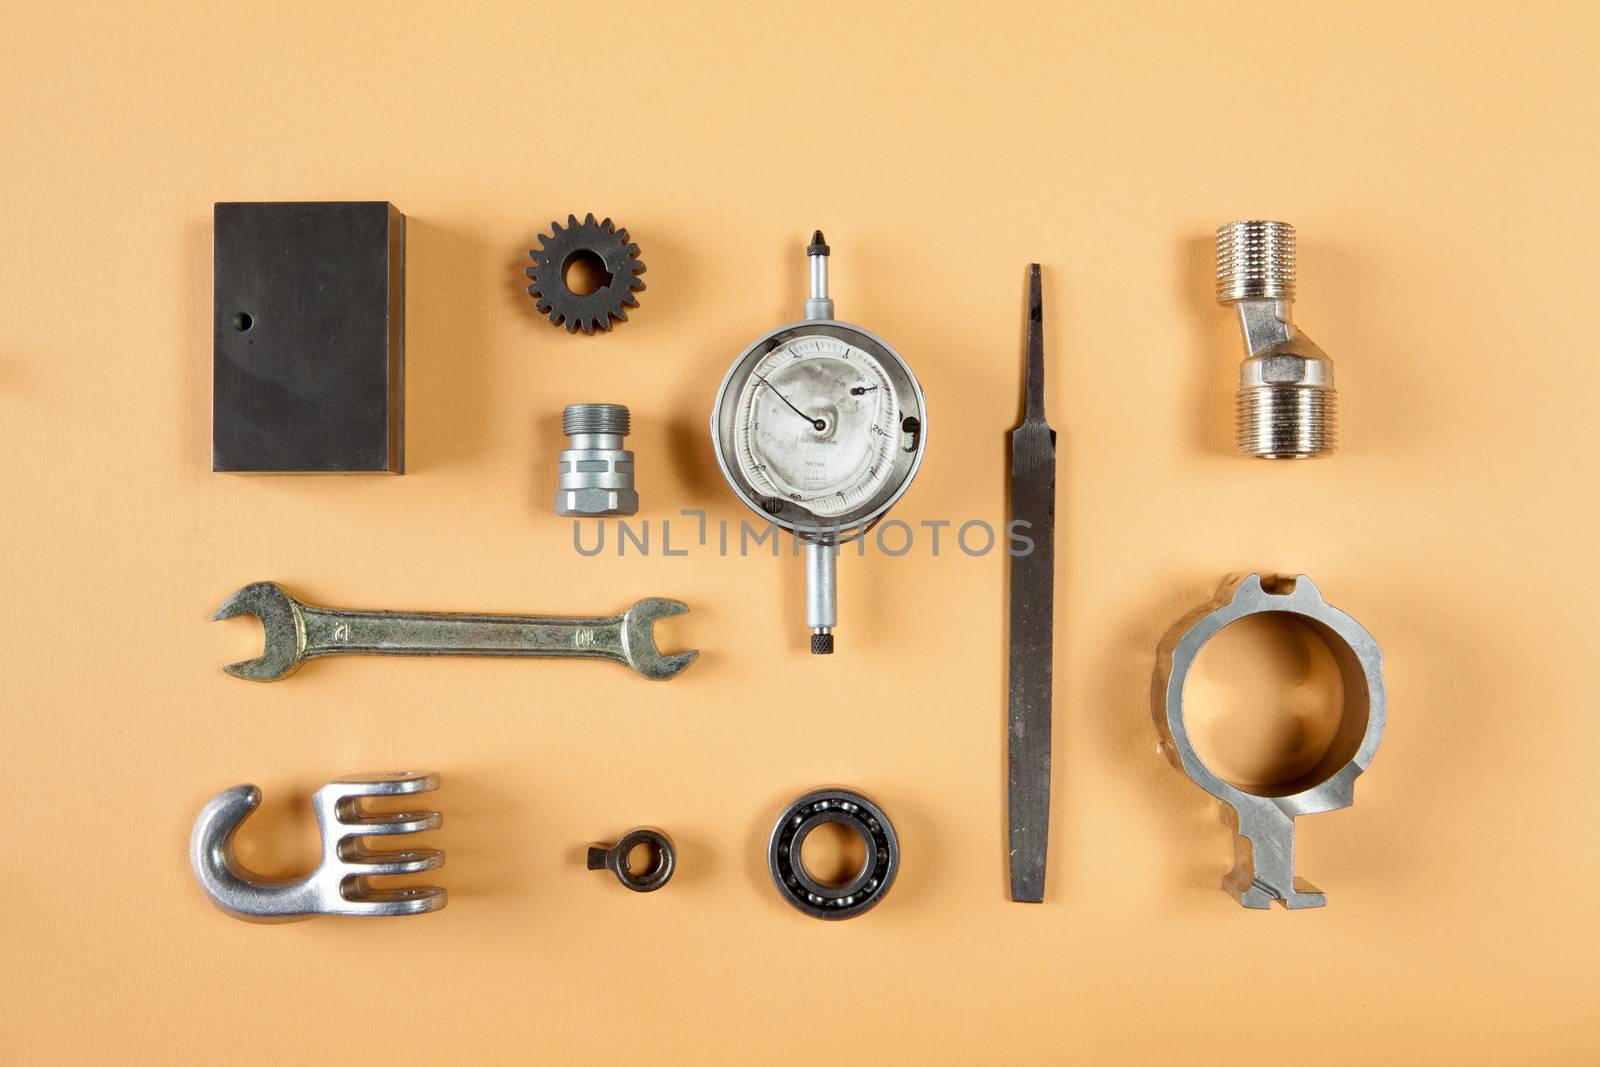 Mixture of different pieces of tools and machinery on orange background